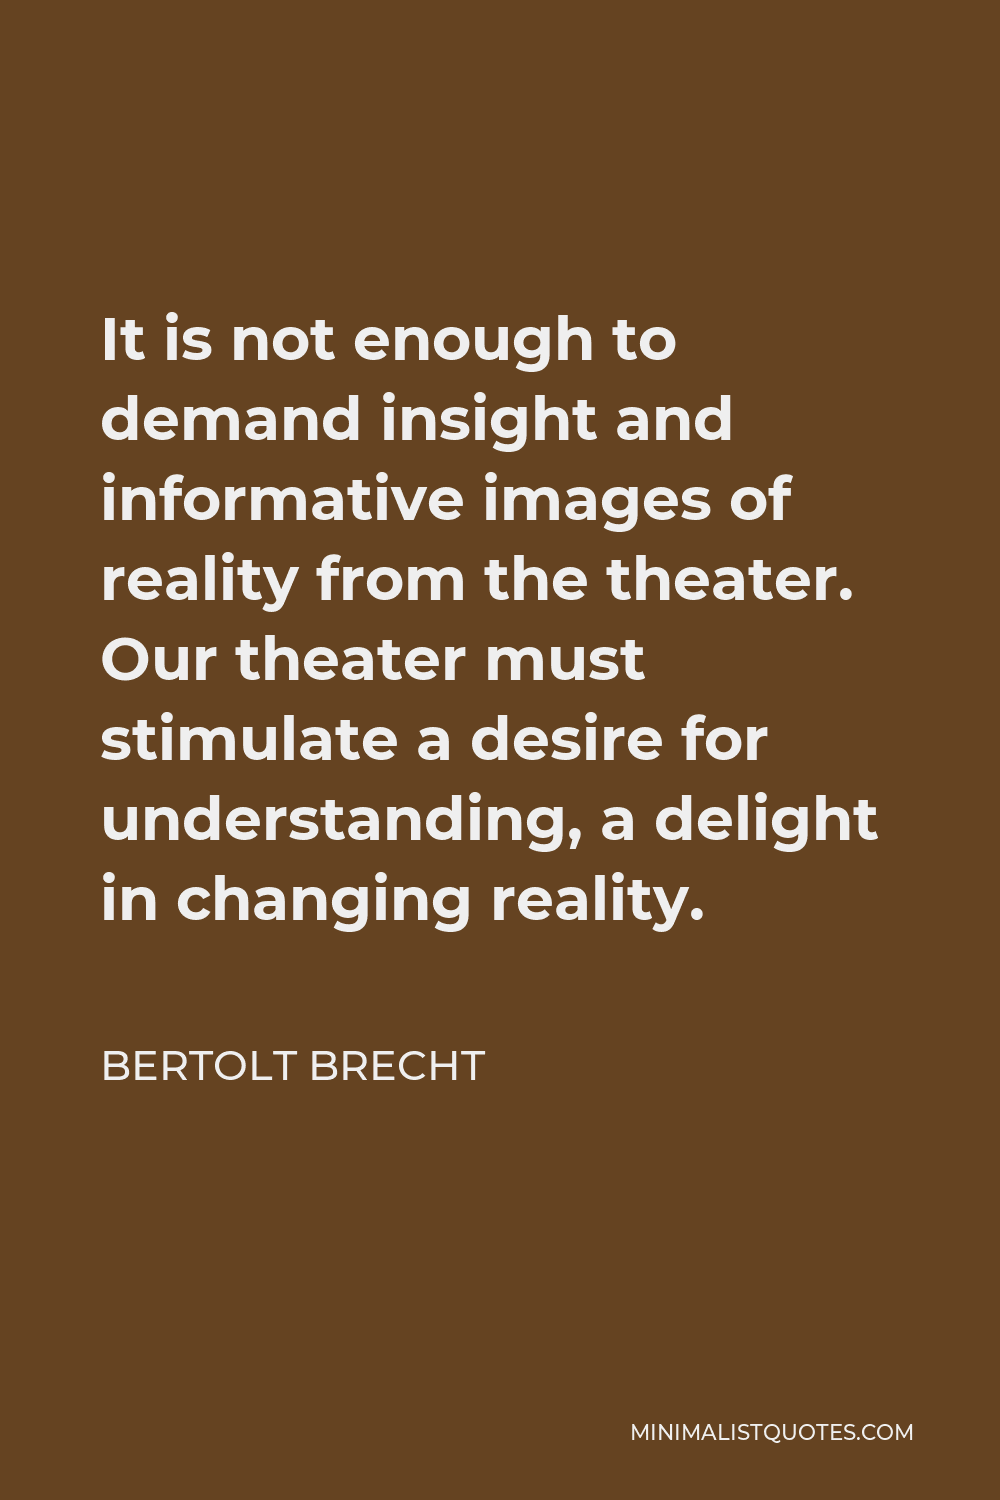 Bertolt Brecht Quote - It is not enough to demand insight and informative images of reality from the theater. Our theater must stimulate a desire for understanding, a delight in changing reality.